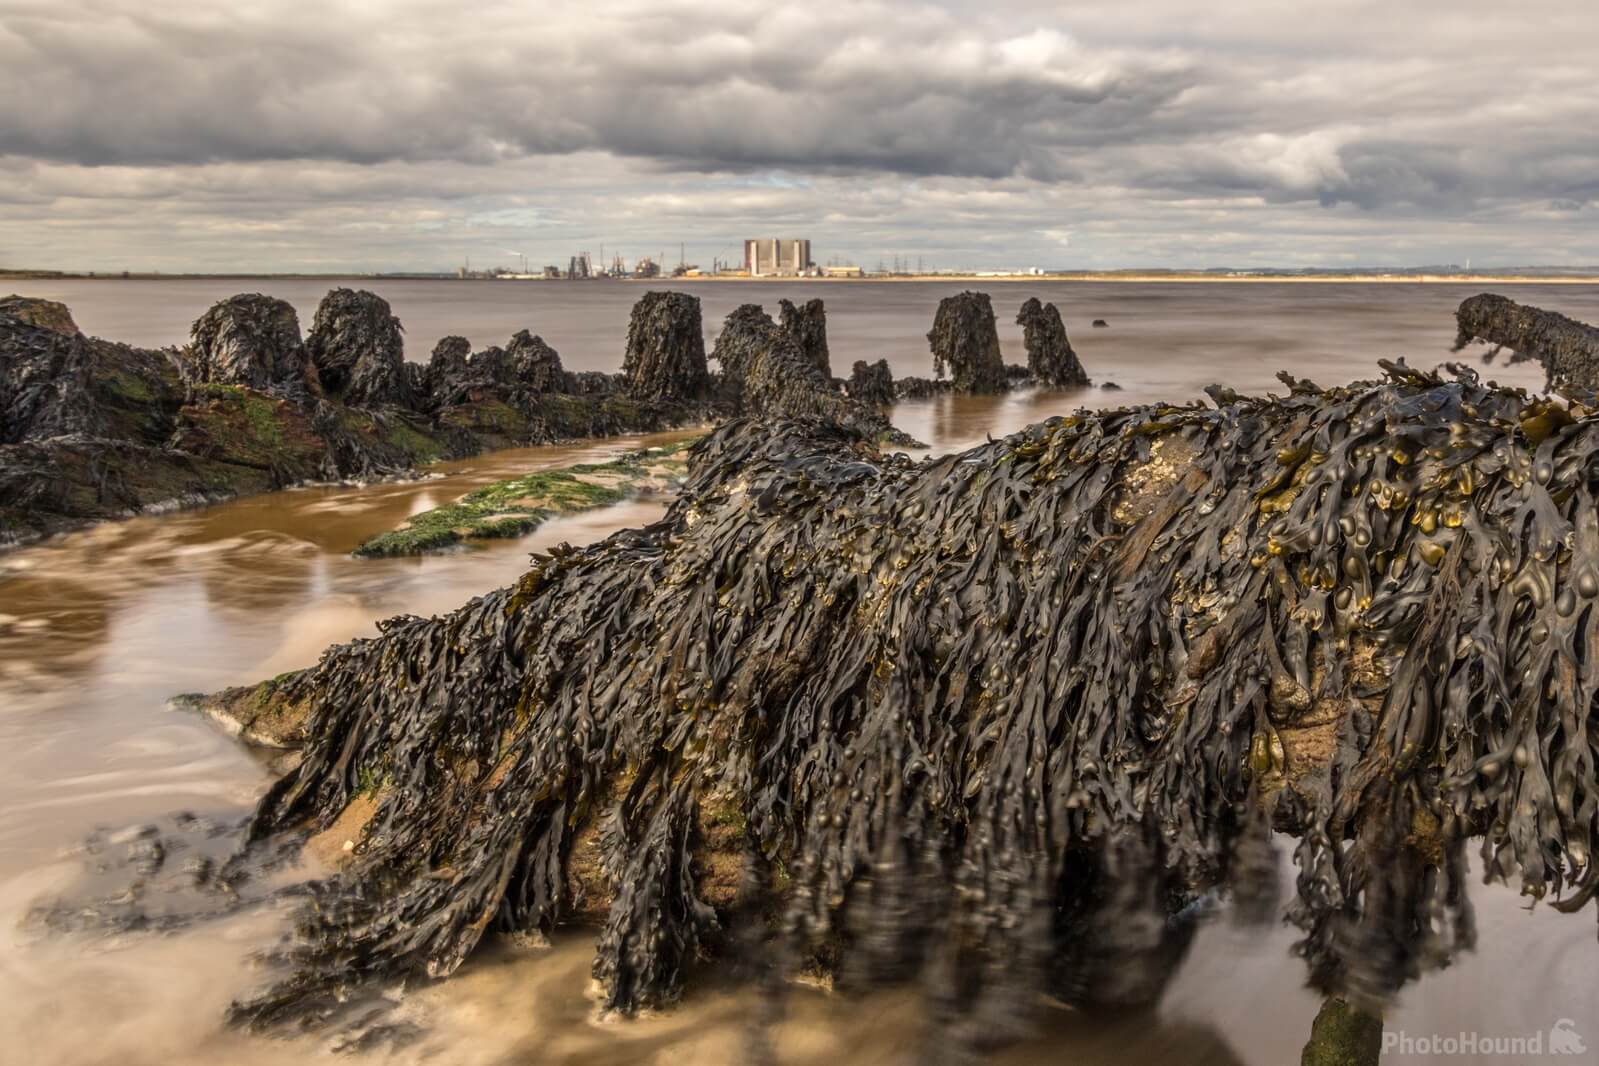 Image of South Gare by Andy Killingbeck